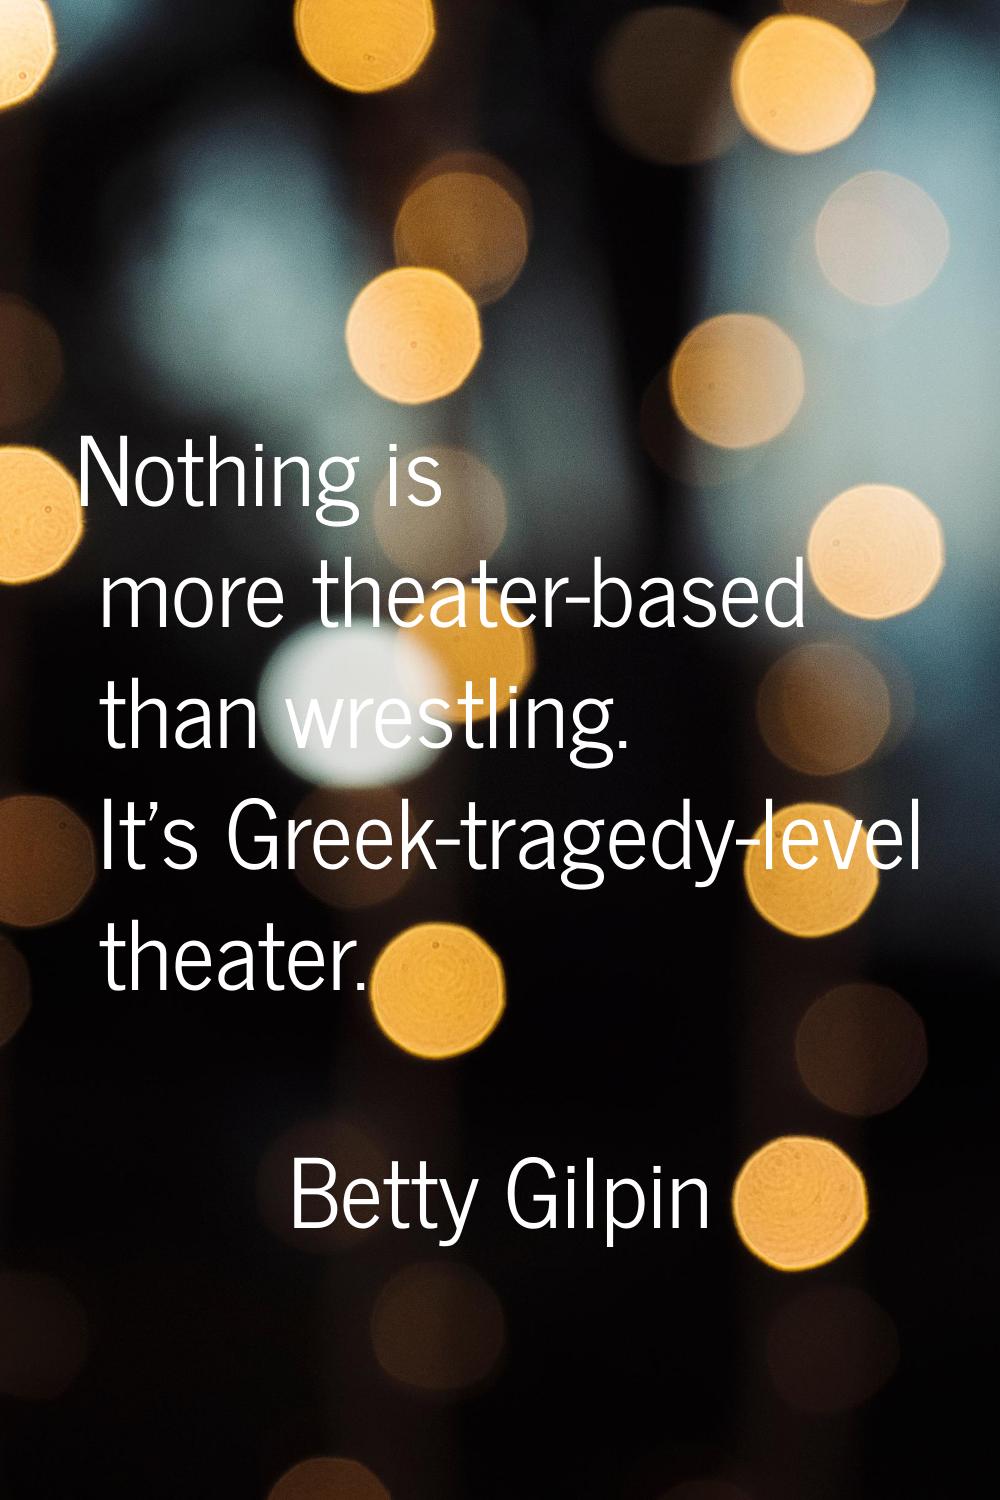 Nothing is more theater-based than wrestling. It's Greek-tragedy-level theater.